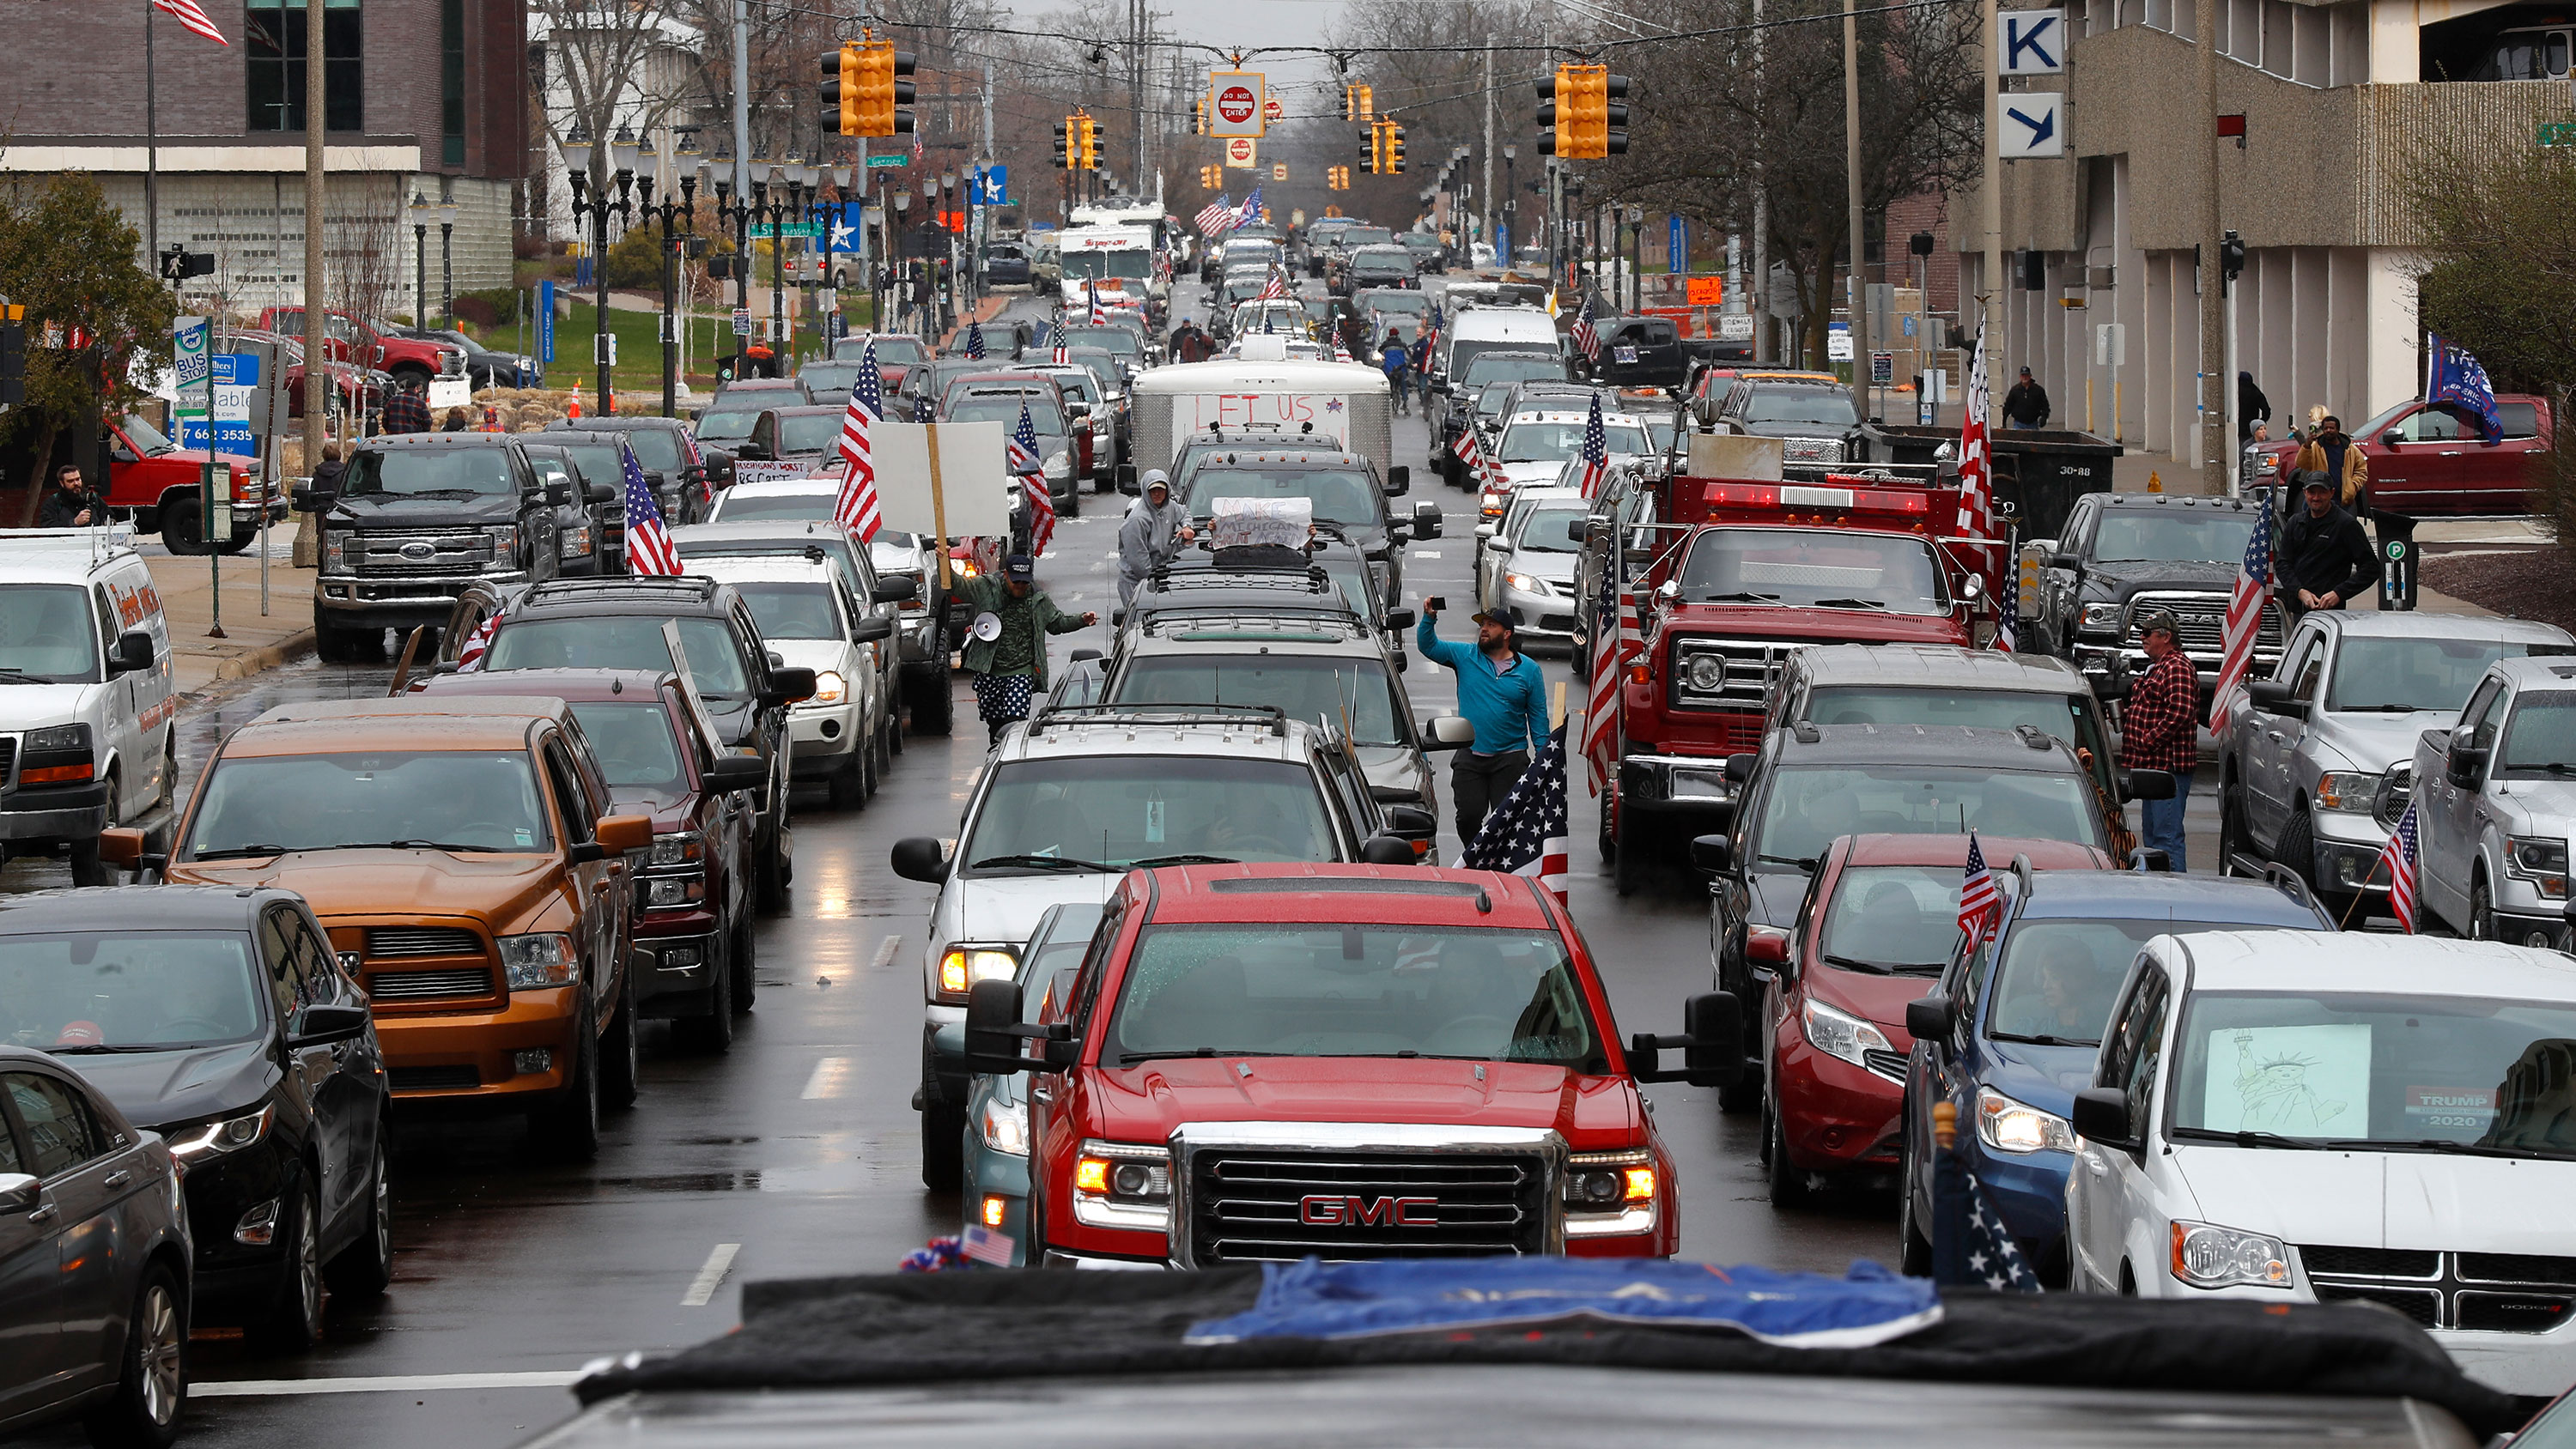 Vehicles sit in gridlock during a protest in Lansing, Michigan, on April 15.